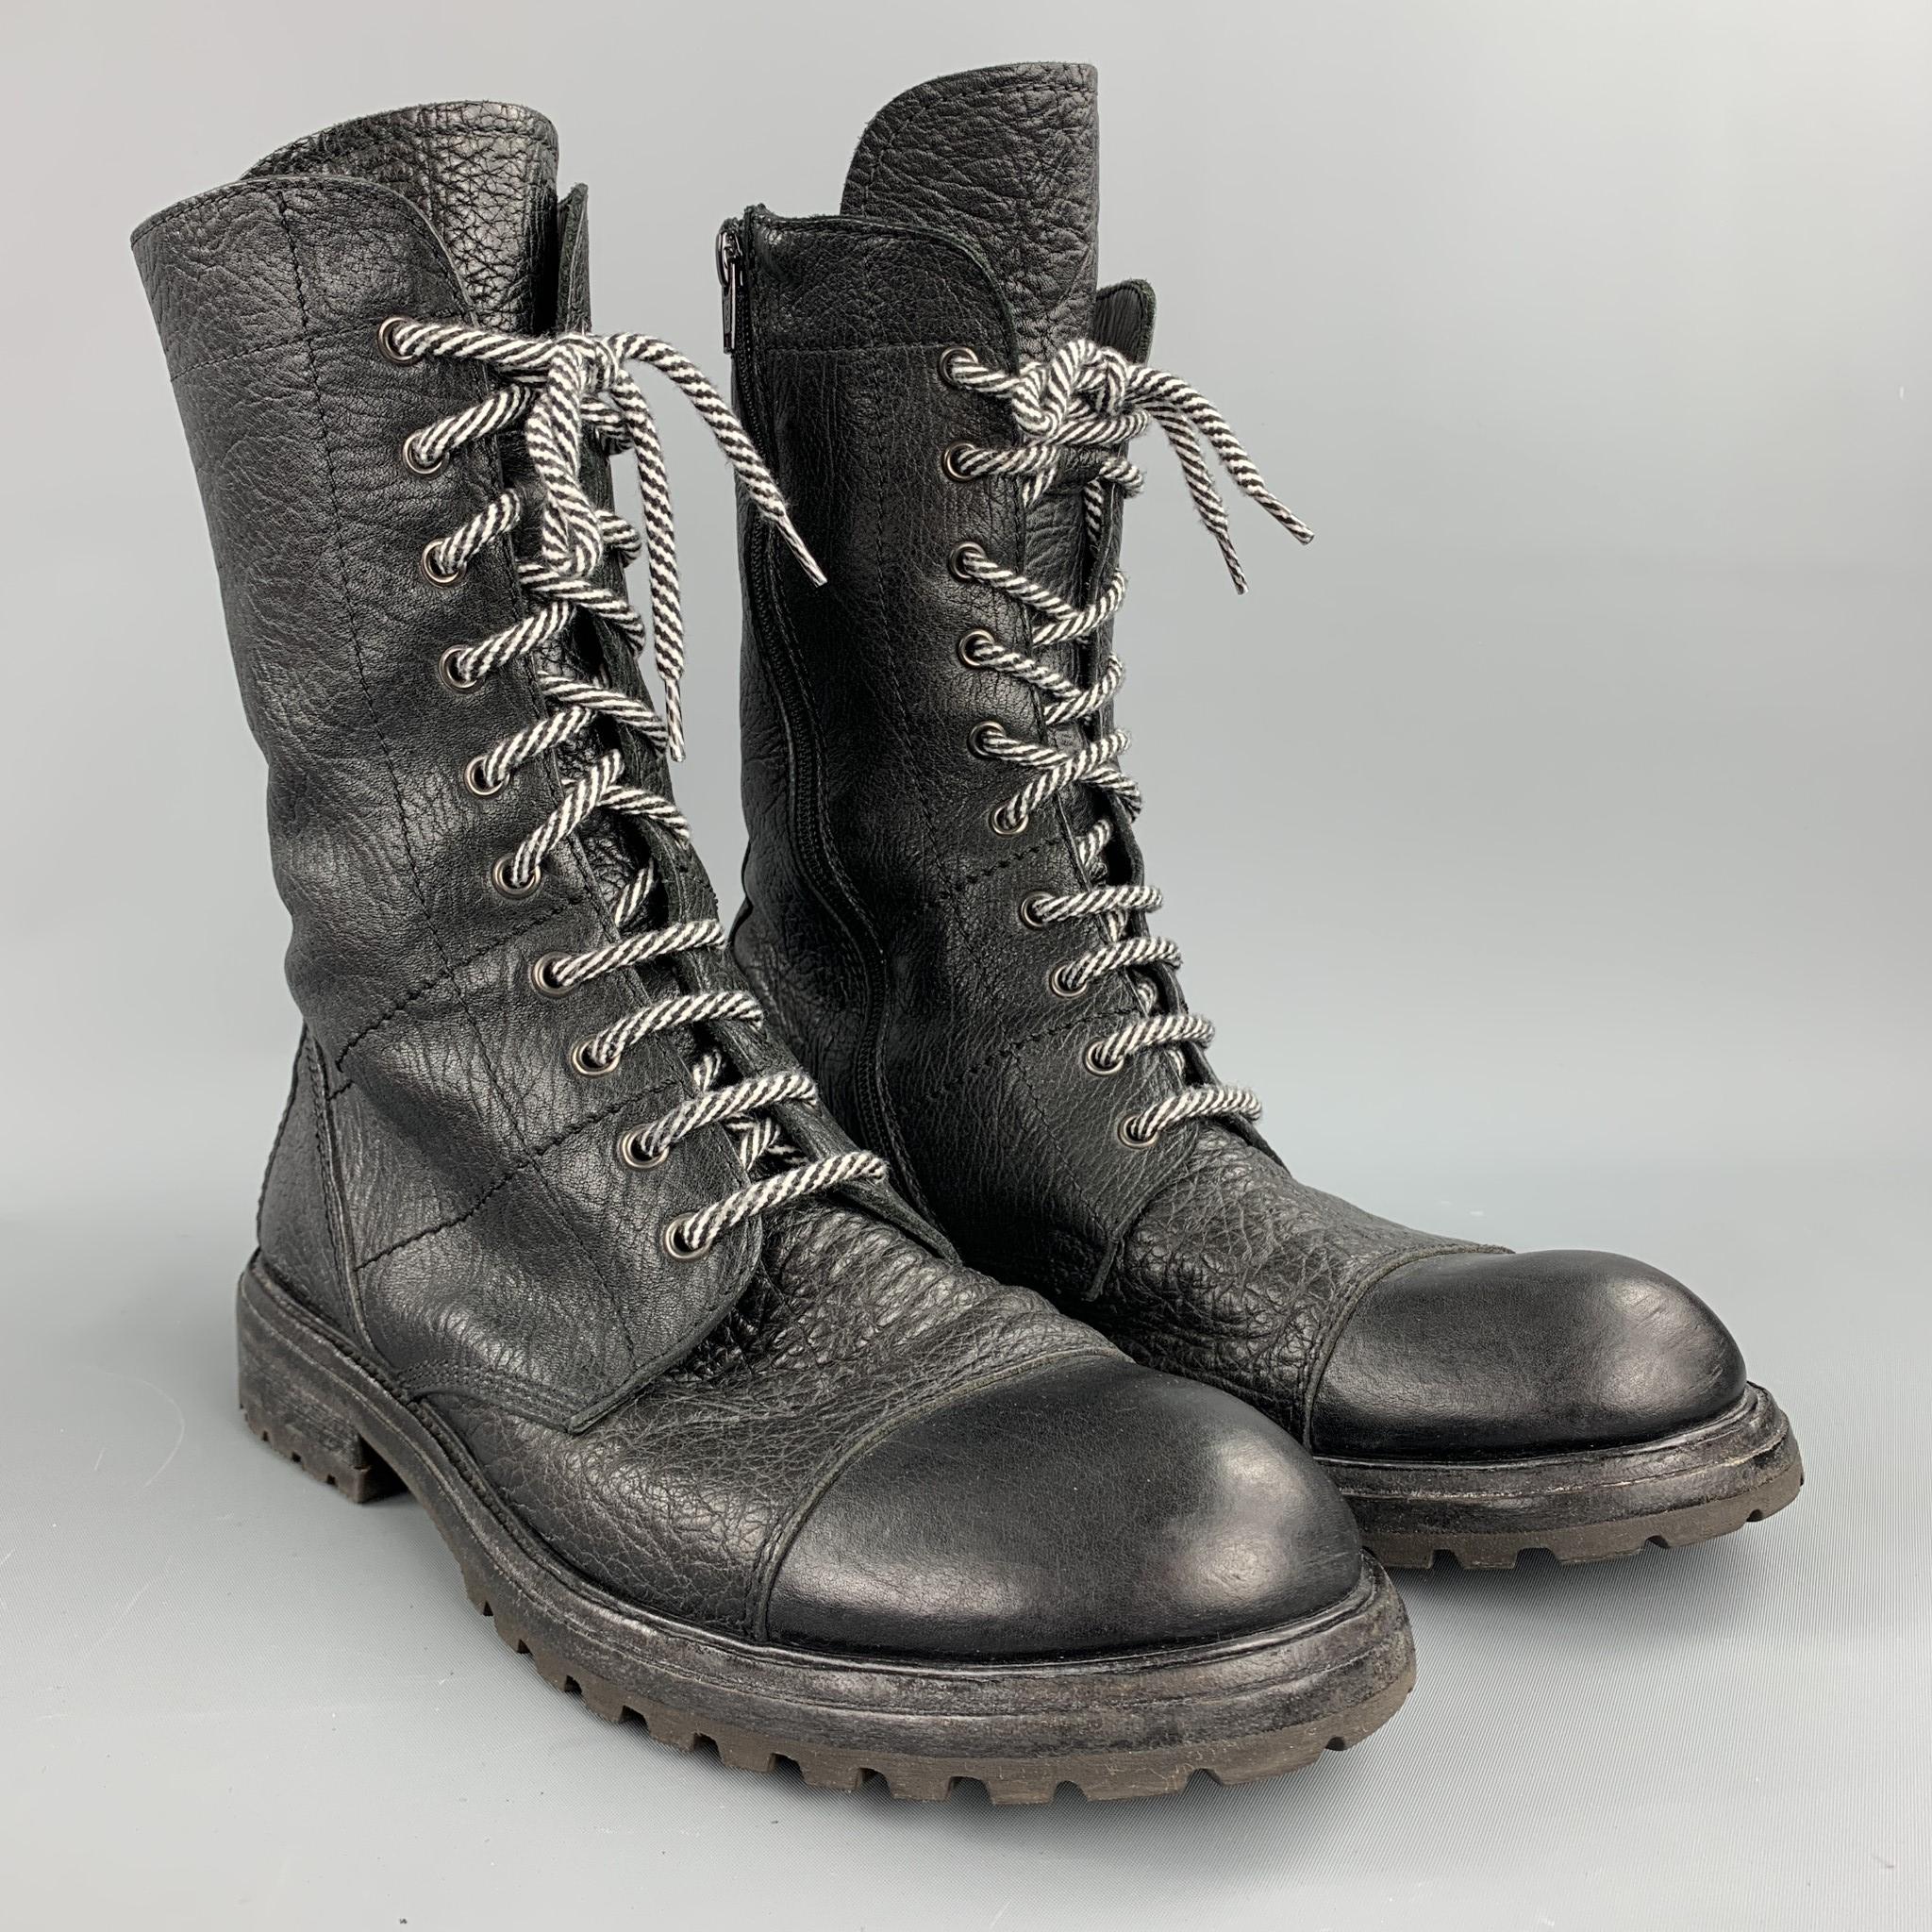 MOMA ankle boots comes in a black leather featuring a cap toe style, stitched details, rubber sole, and a lace up closure. Made in Italy.

Good Pre-Owned Condition.
Marked: EU 42

Measurements:

Length: 12.5 in.
Width: 4 in. 
Height: 10.5 in. 